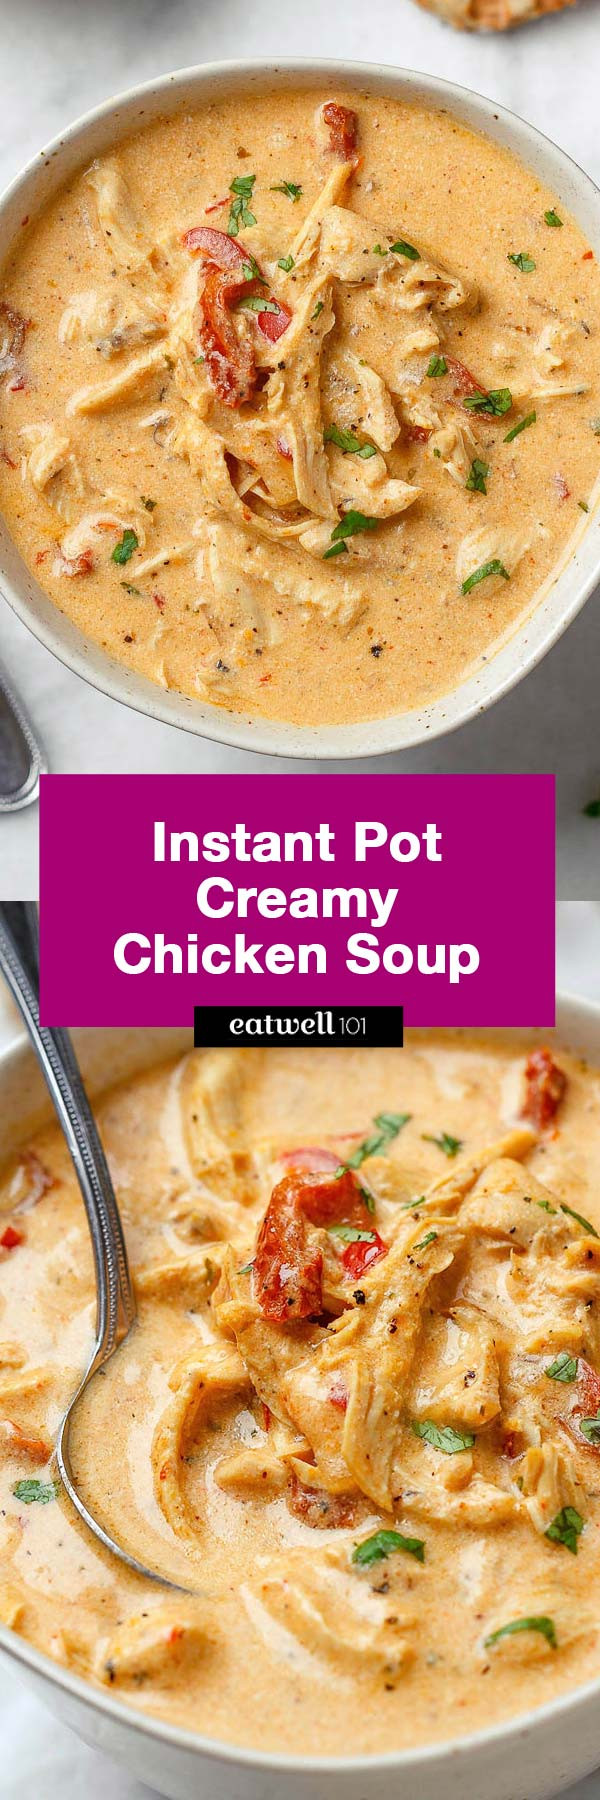 Instant Pot Chicken With Cream Of Chicken Soup
 Instant Pot Creamy Chicken Soup Recipe – How to make